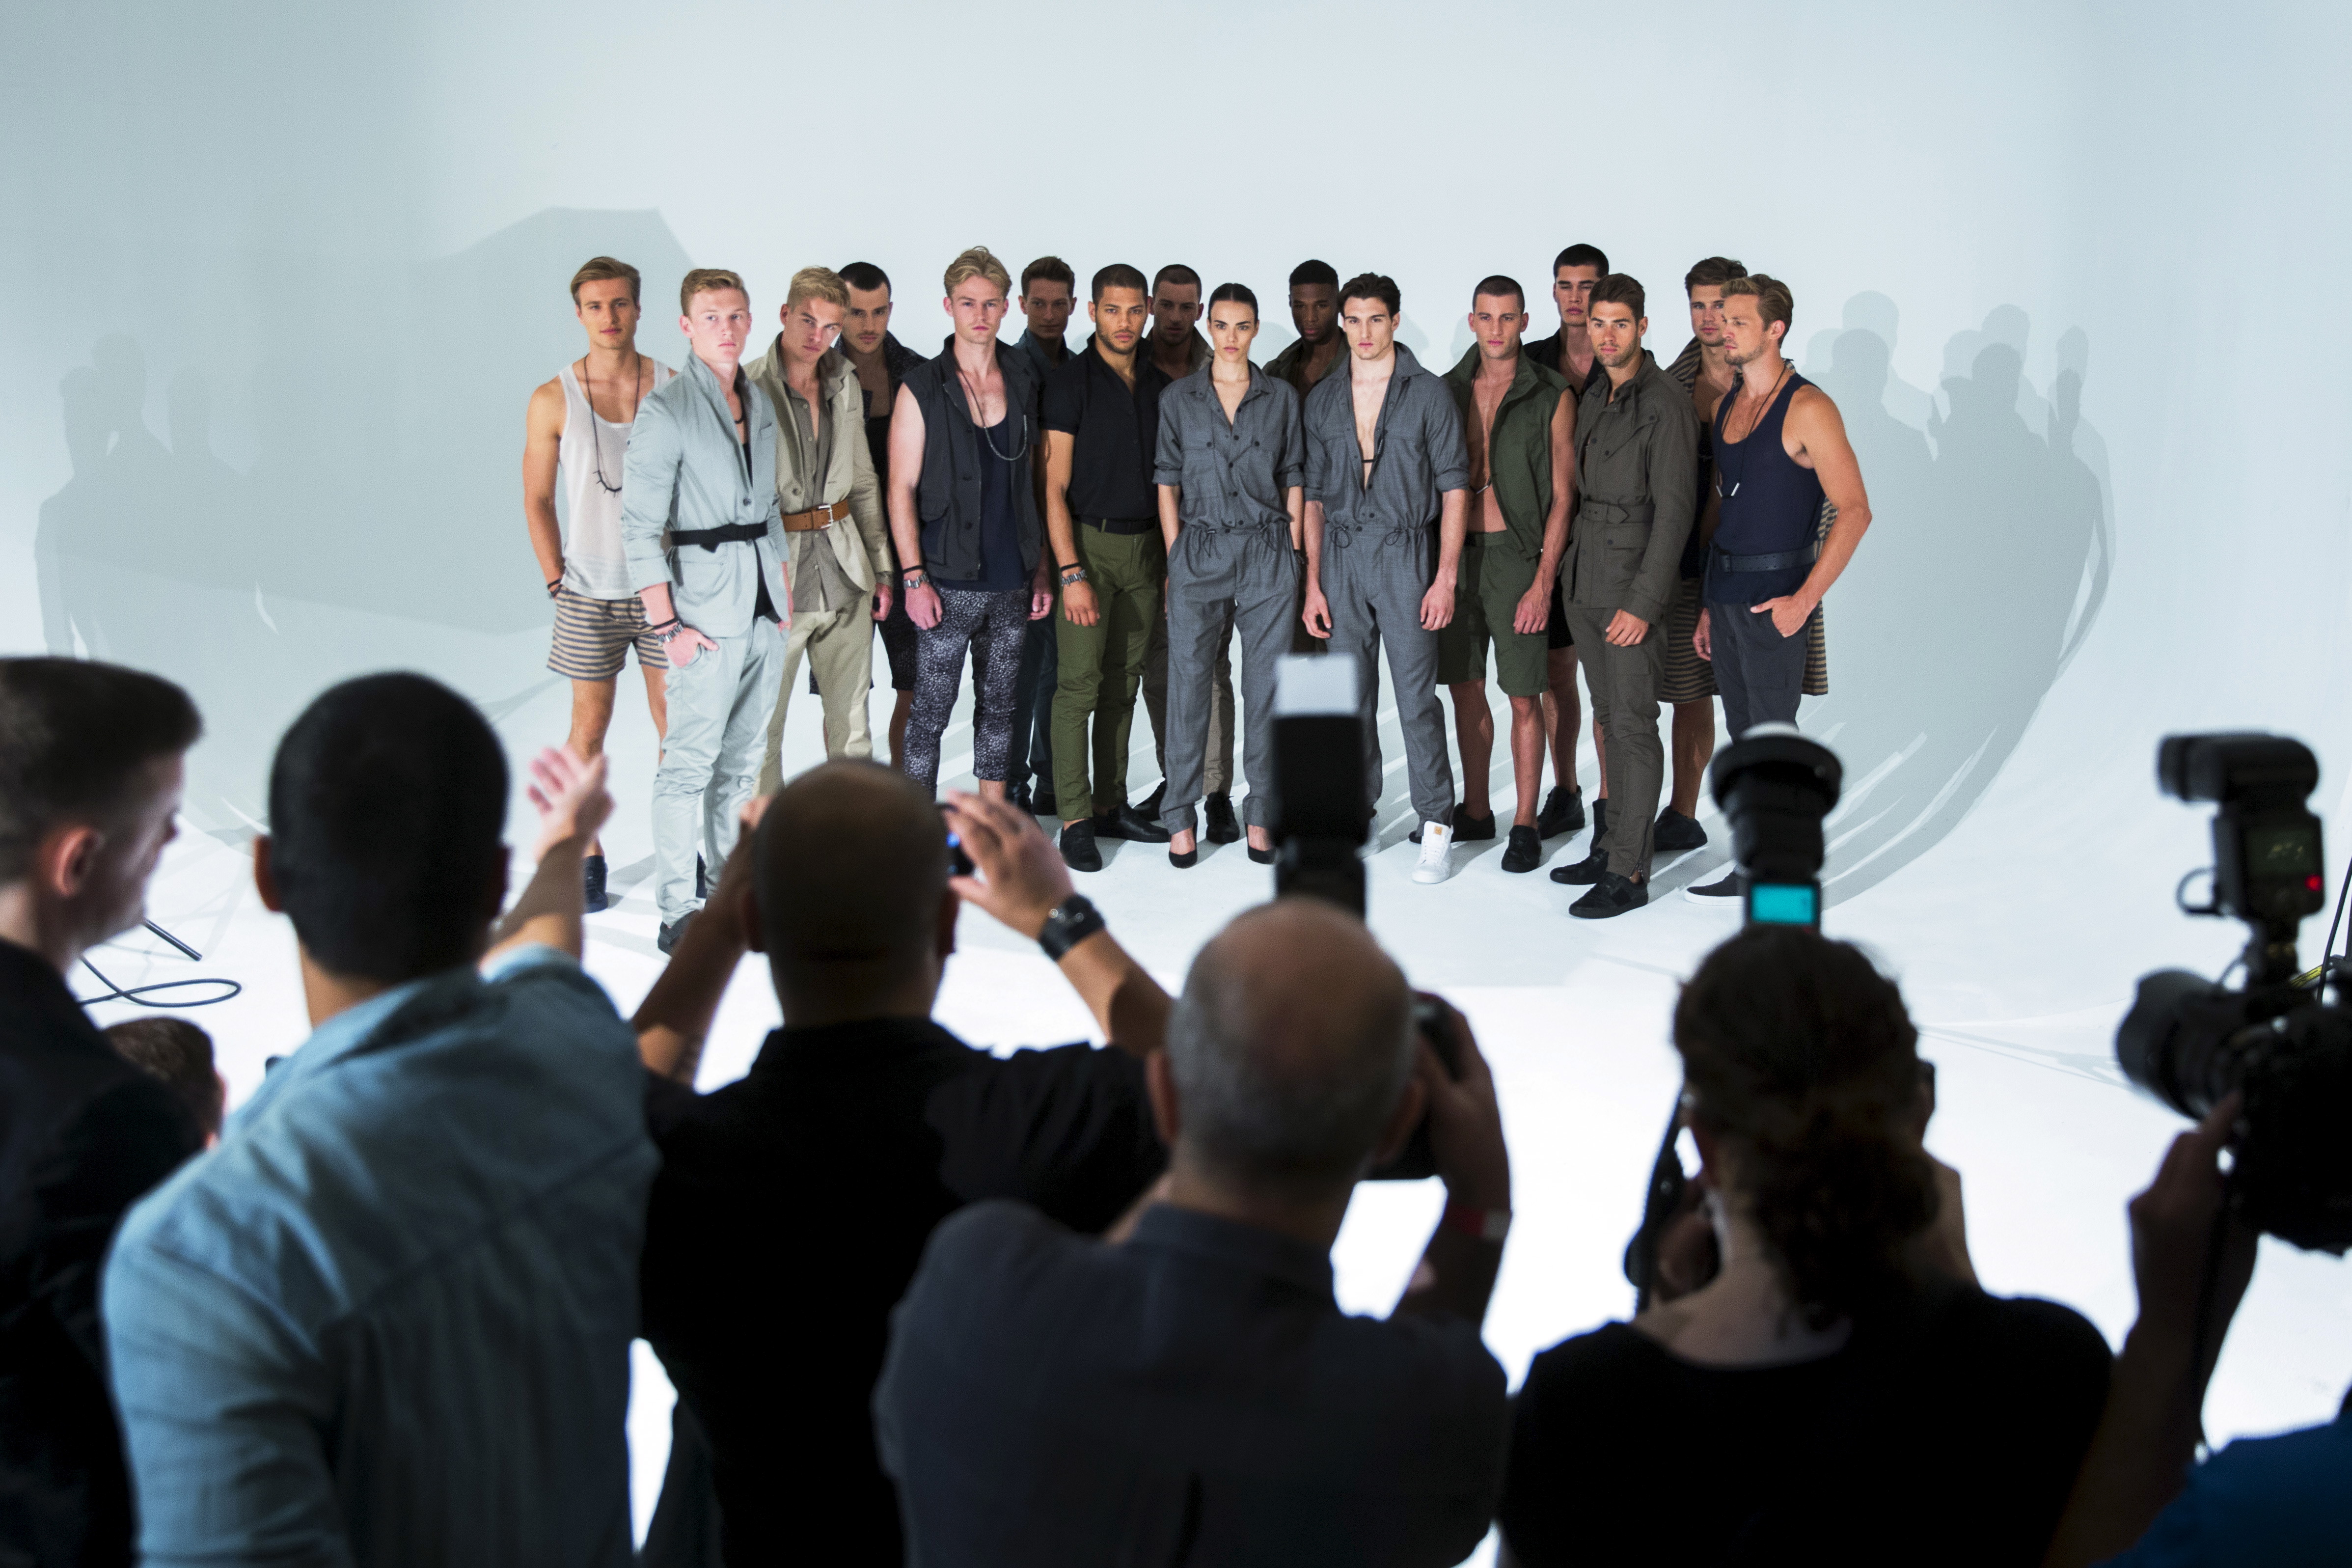 Models stand on stage for the Cadet presentation during New York Fashion Week: Men's. (Lucas Jackson / REUTERS)